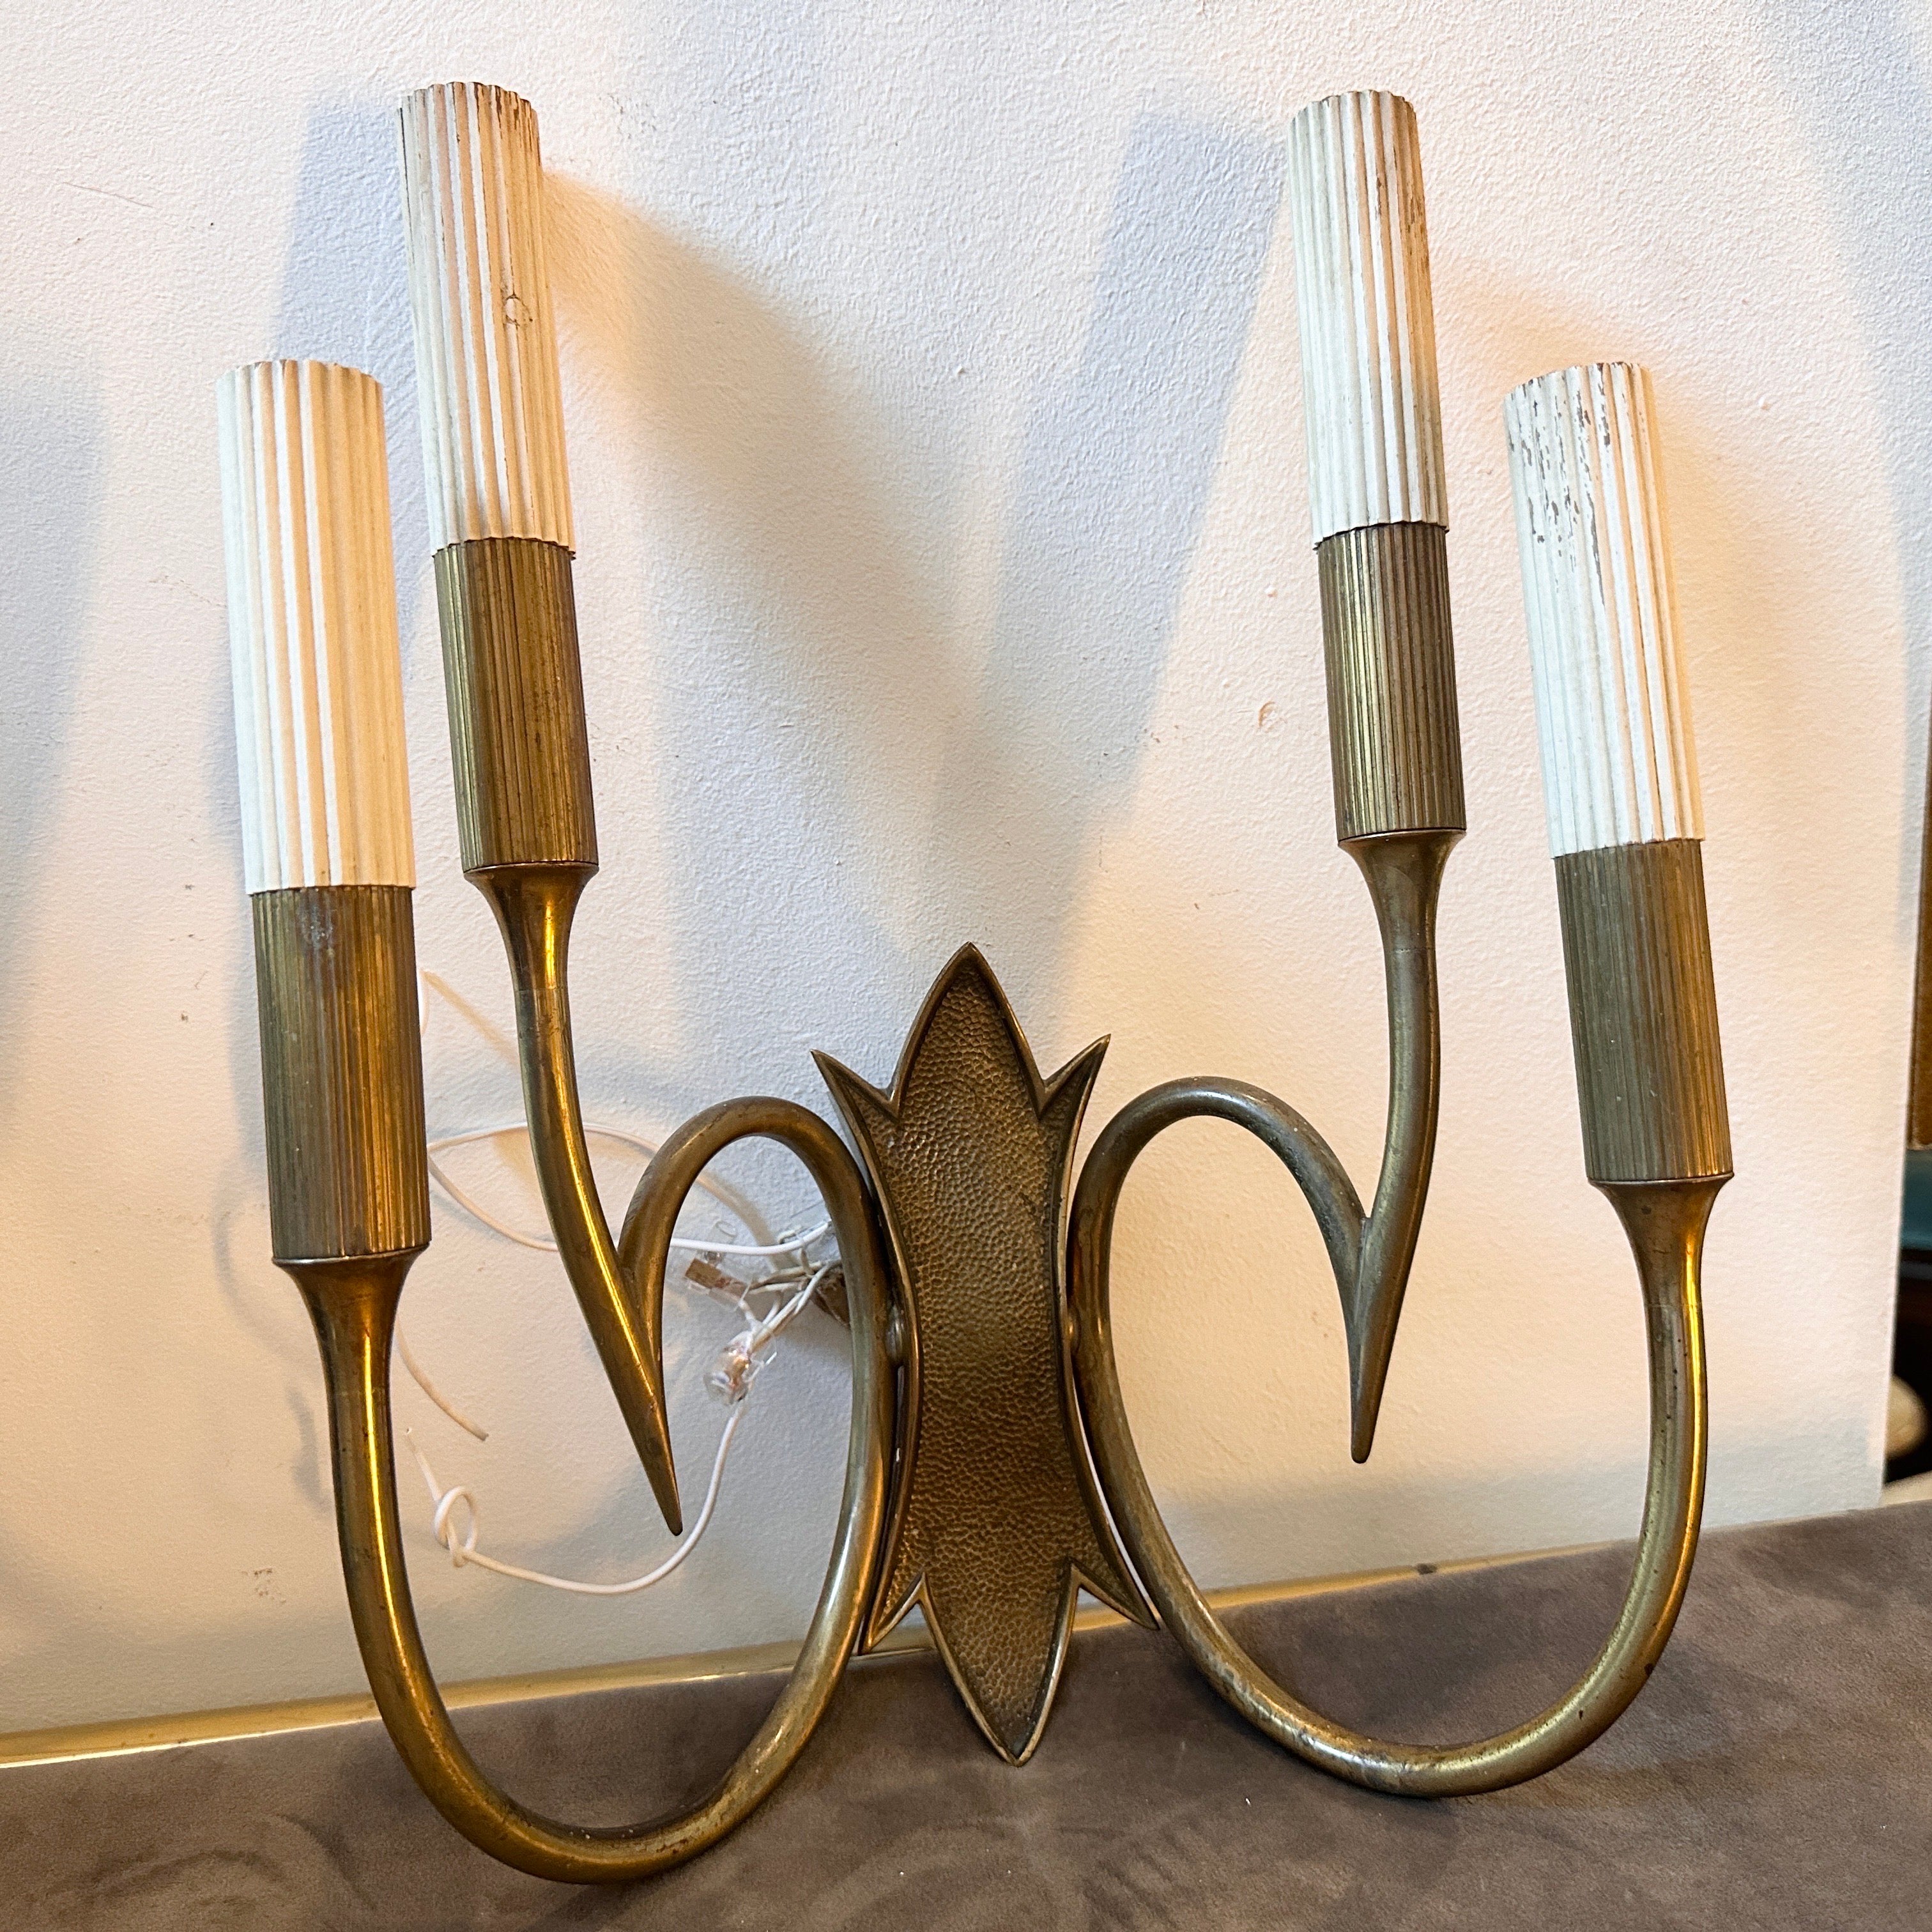 
These Two 1950s wall sconces designed and manufactured in Italy in the manner of Oscar Torlasco exude a timeless elegance and sophistication characteristic of the mid-century design era. Oscar Torlasco was a renowned Italian lighting designer known